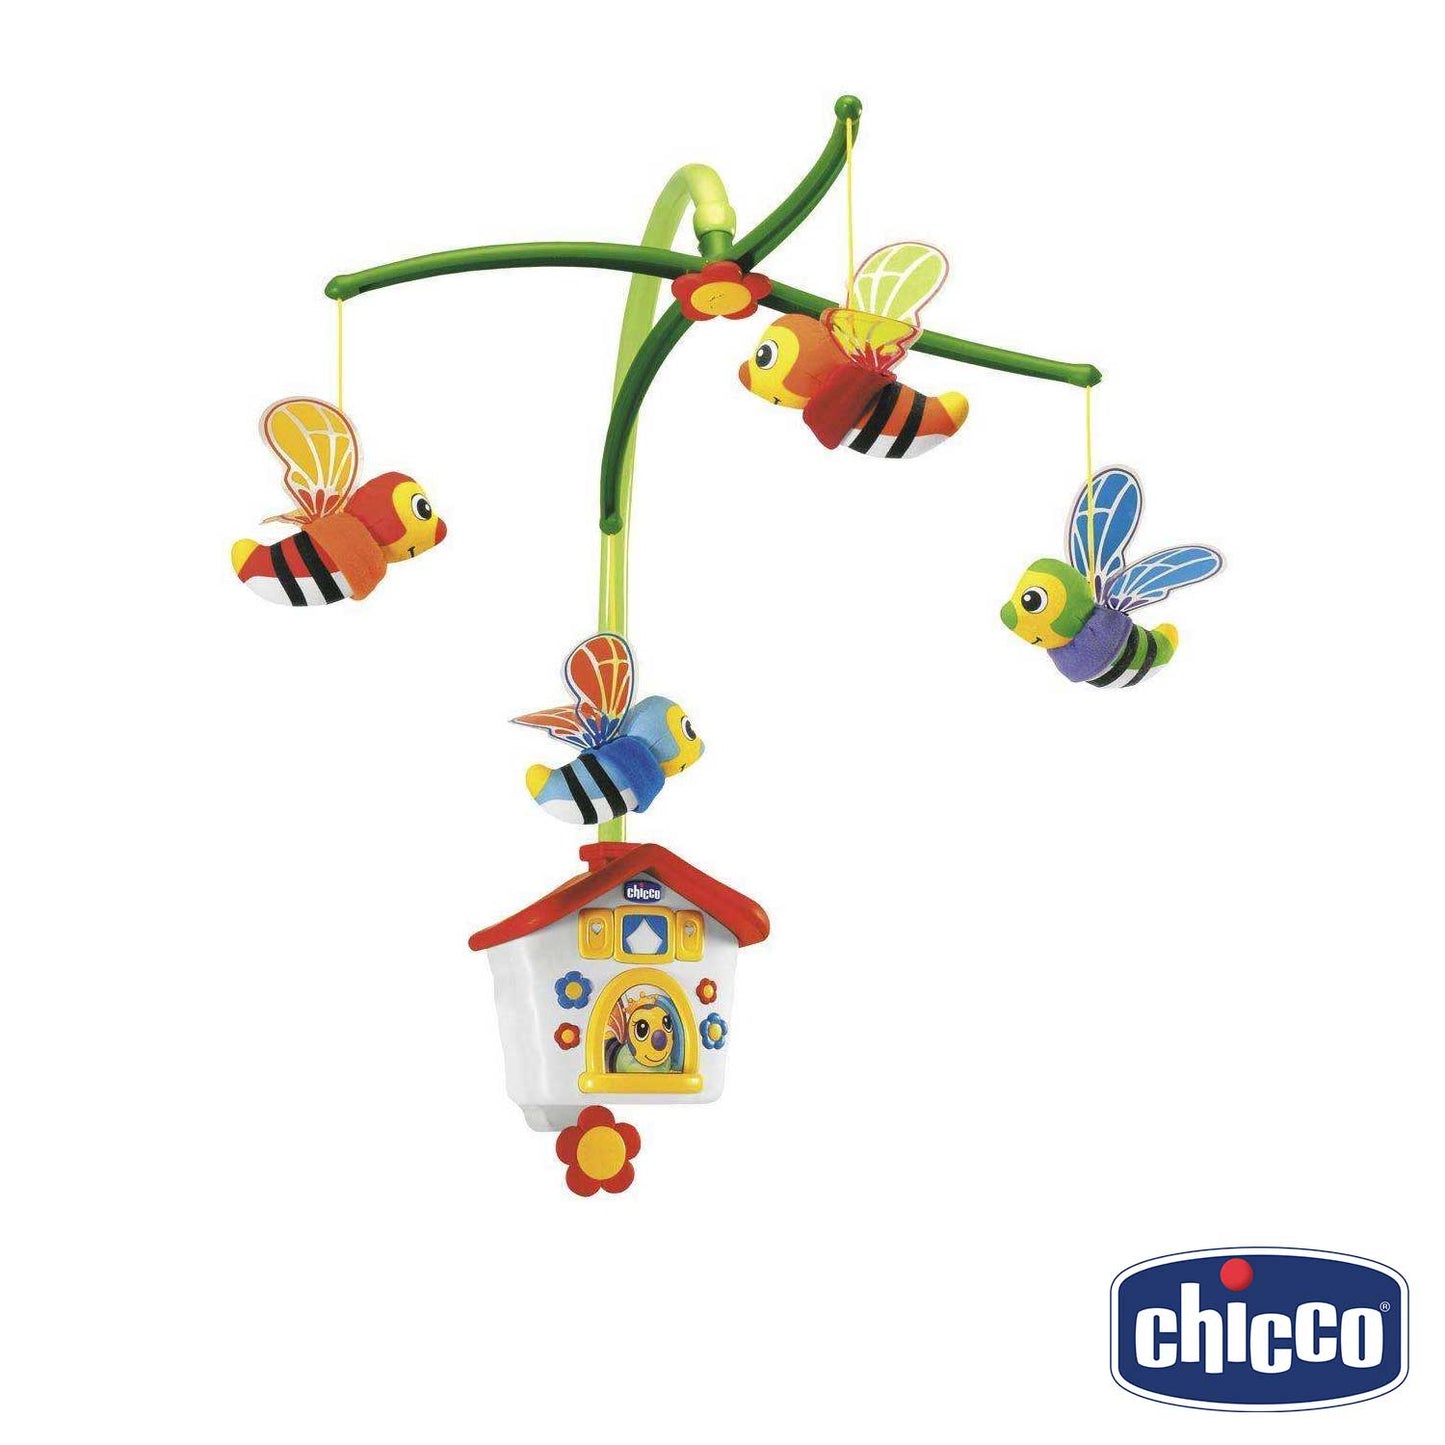 Chicco - Carousel House of the Bees